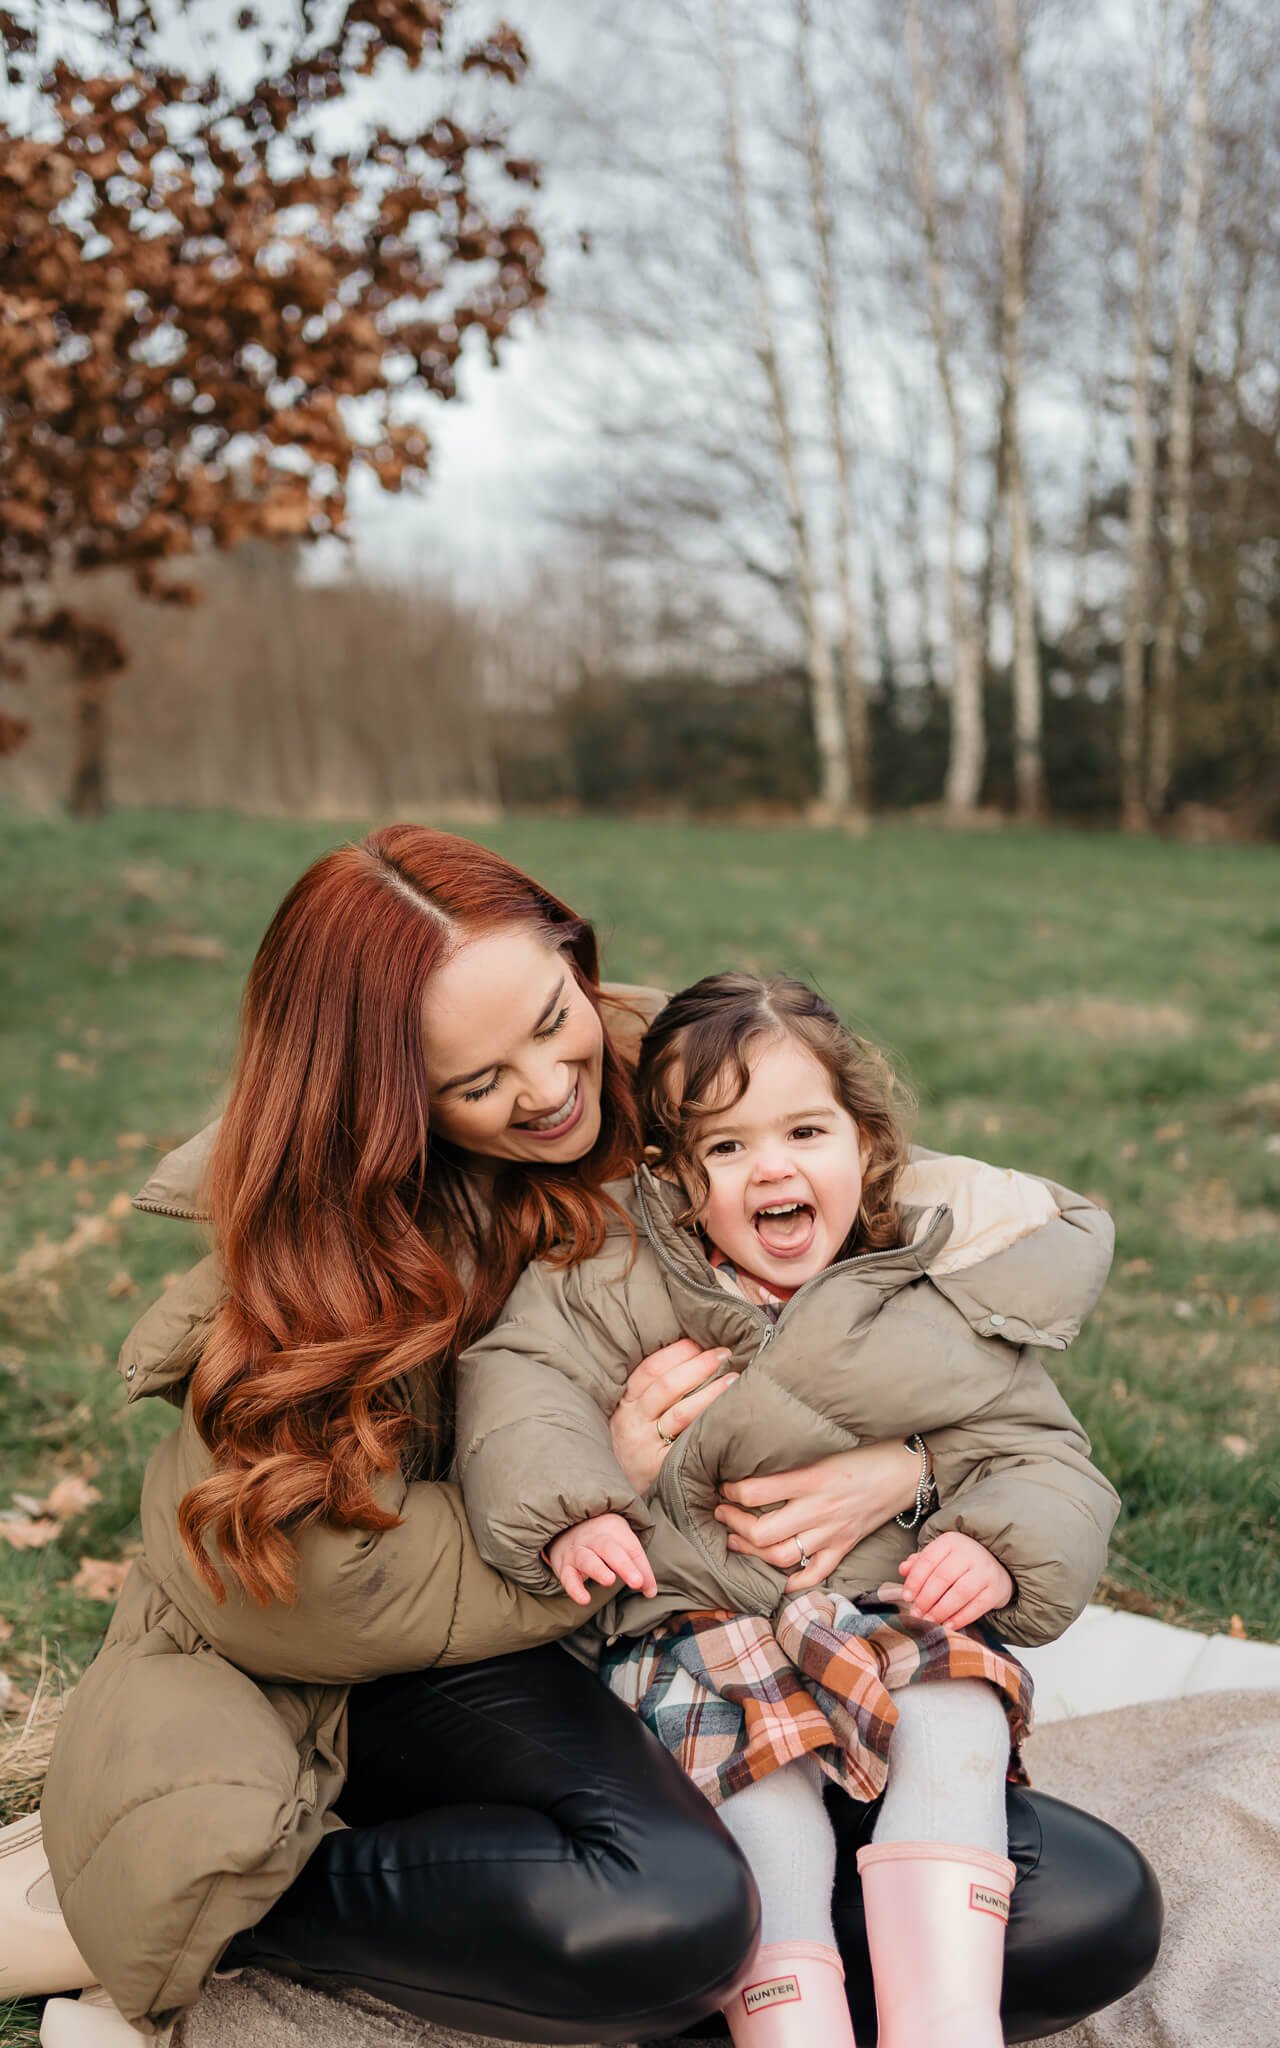  Mum with red hair tickling daughter by The Corbett Creative Photography in Rugby 